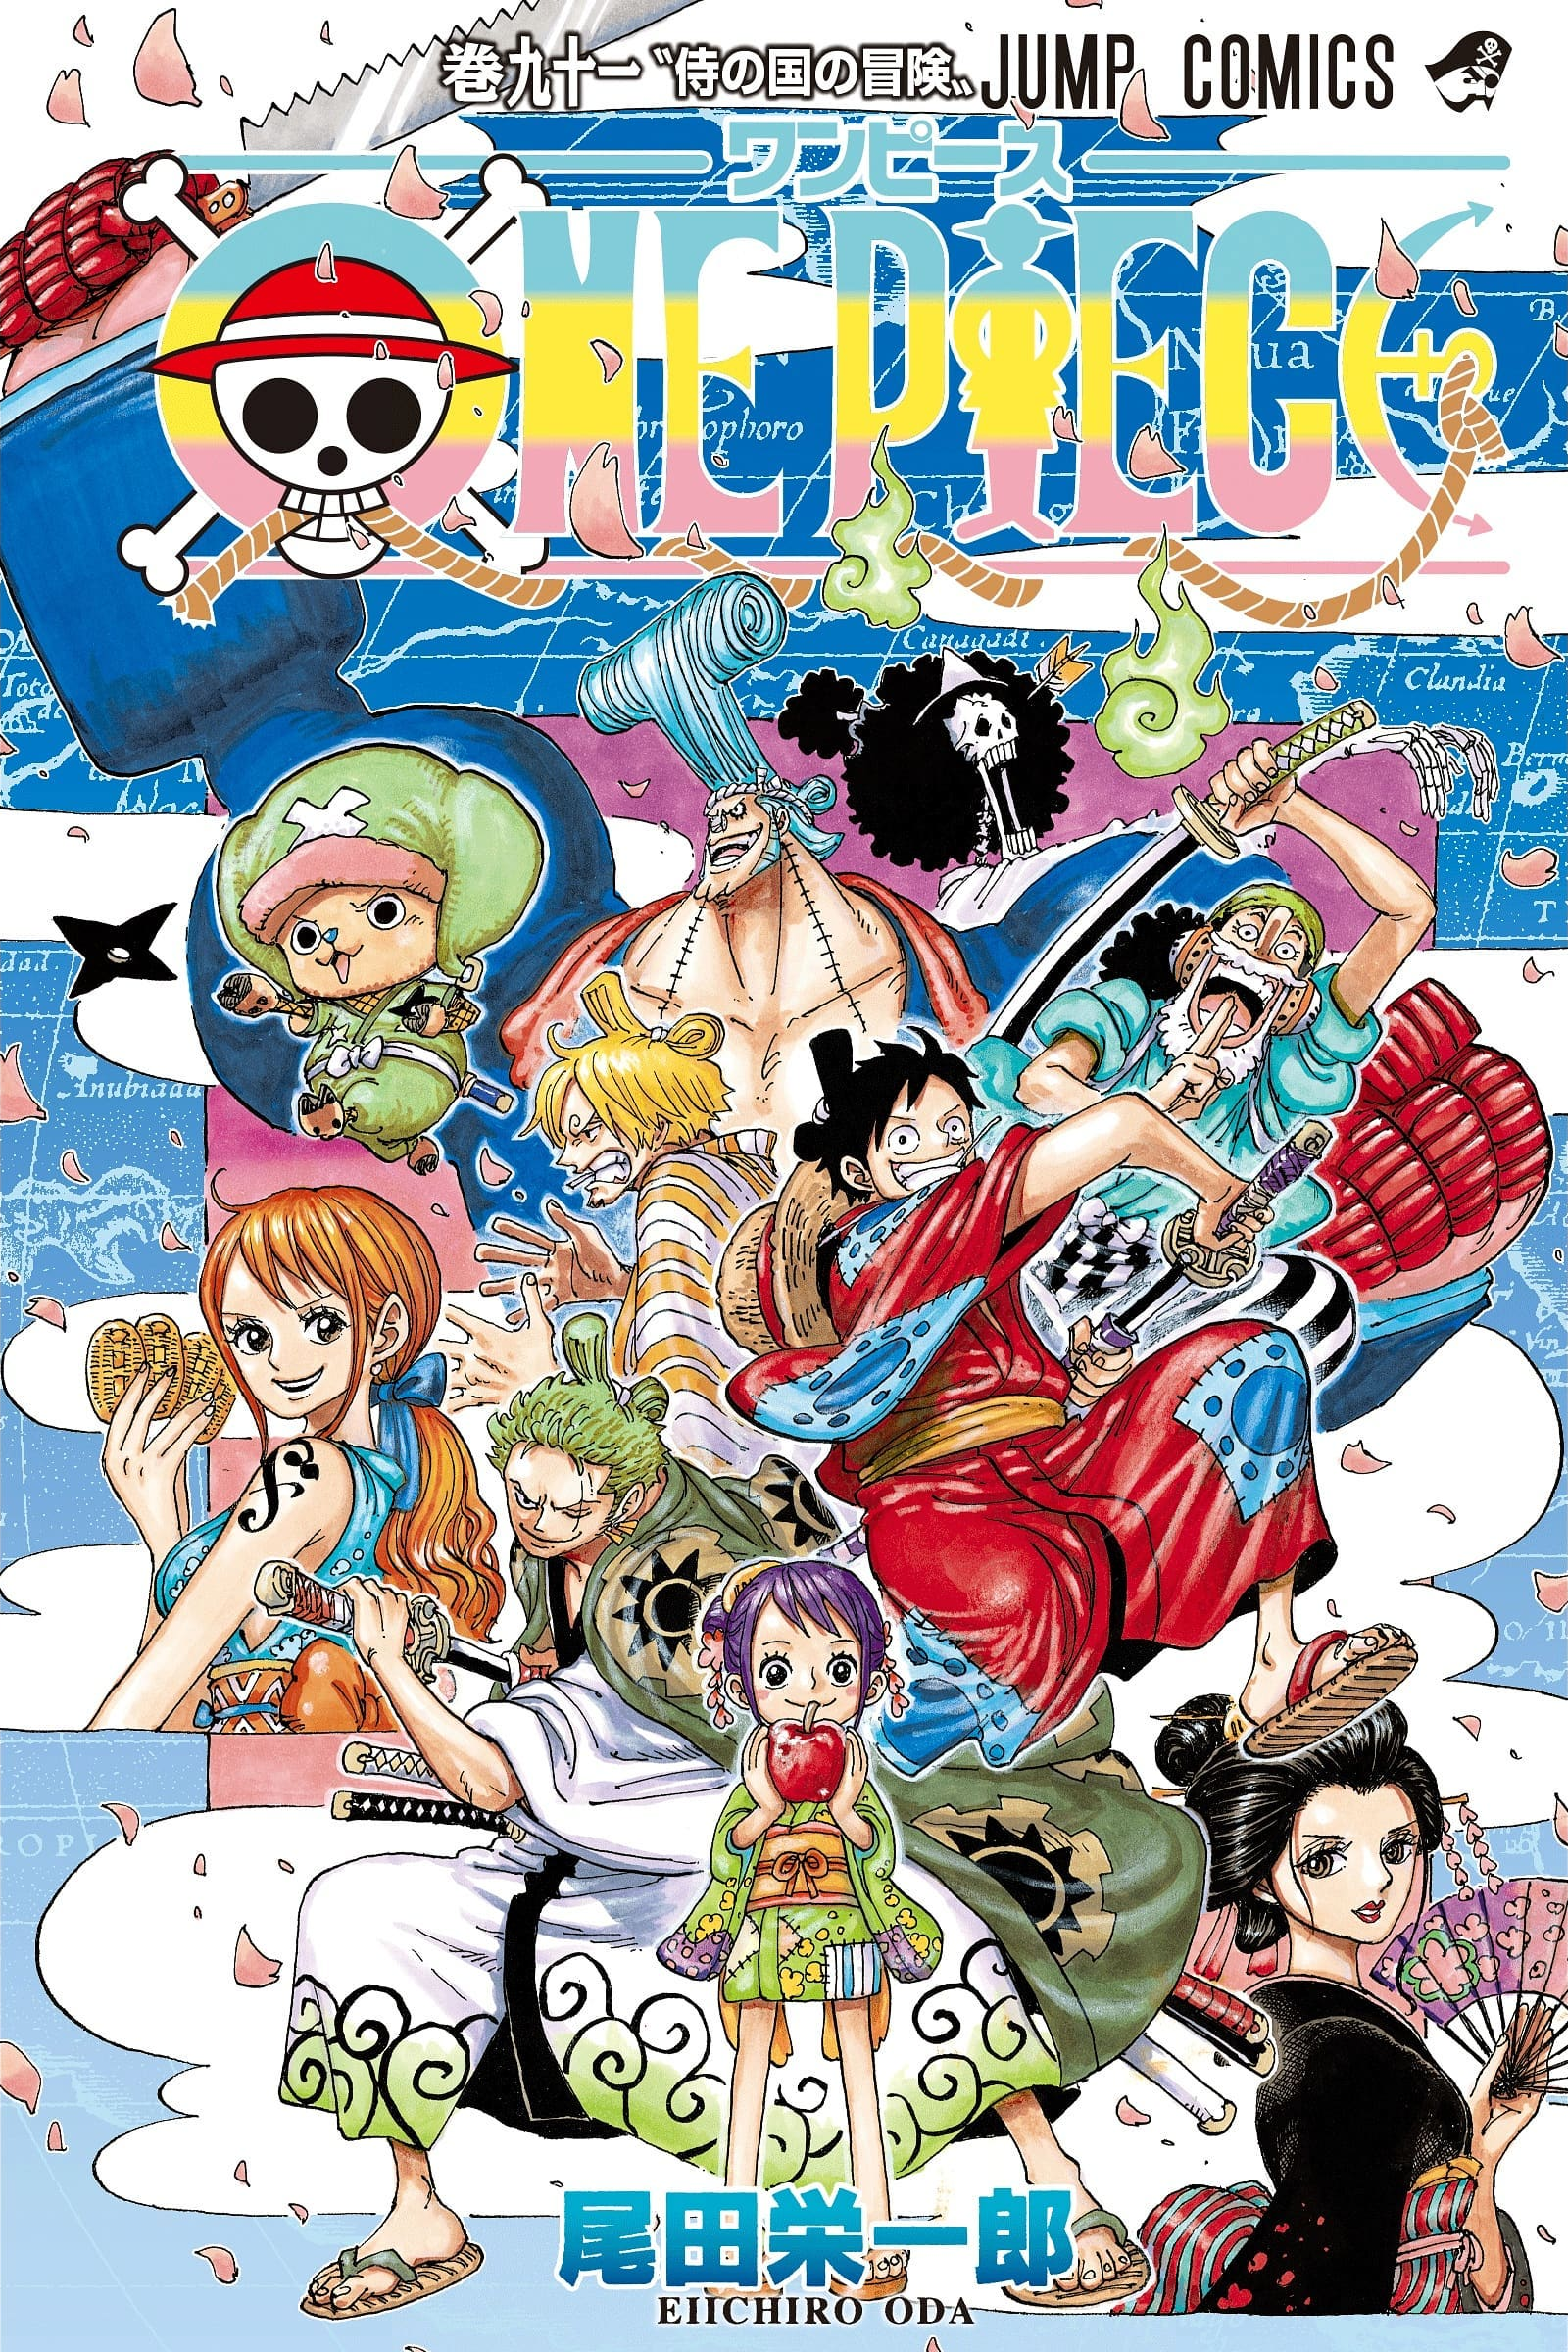 Collectibles Art Japanese Anime One Piece One Piece Volume 80 Japanese Manga Comix Anime Onepiece Jp F S